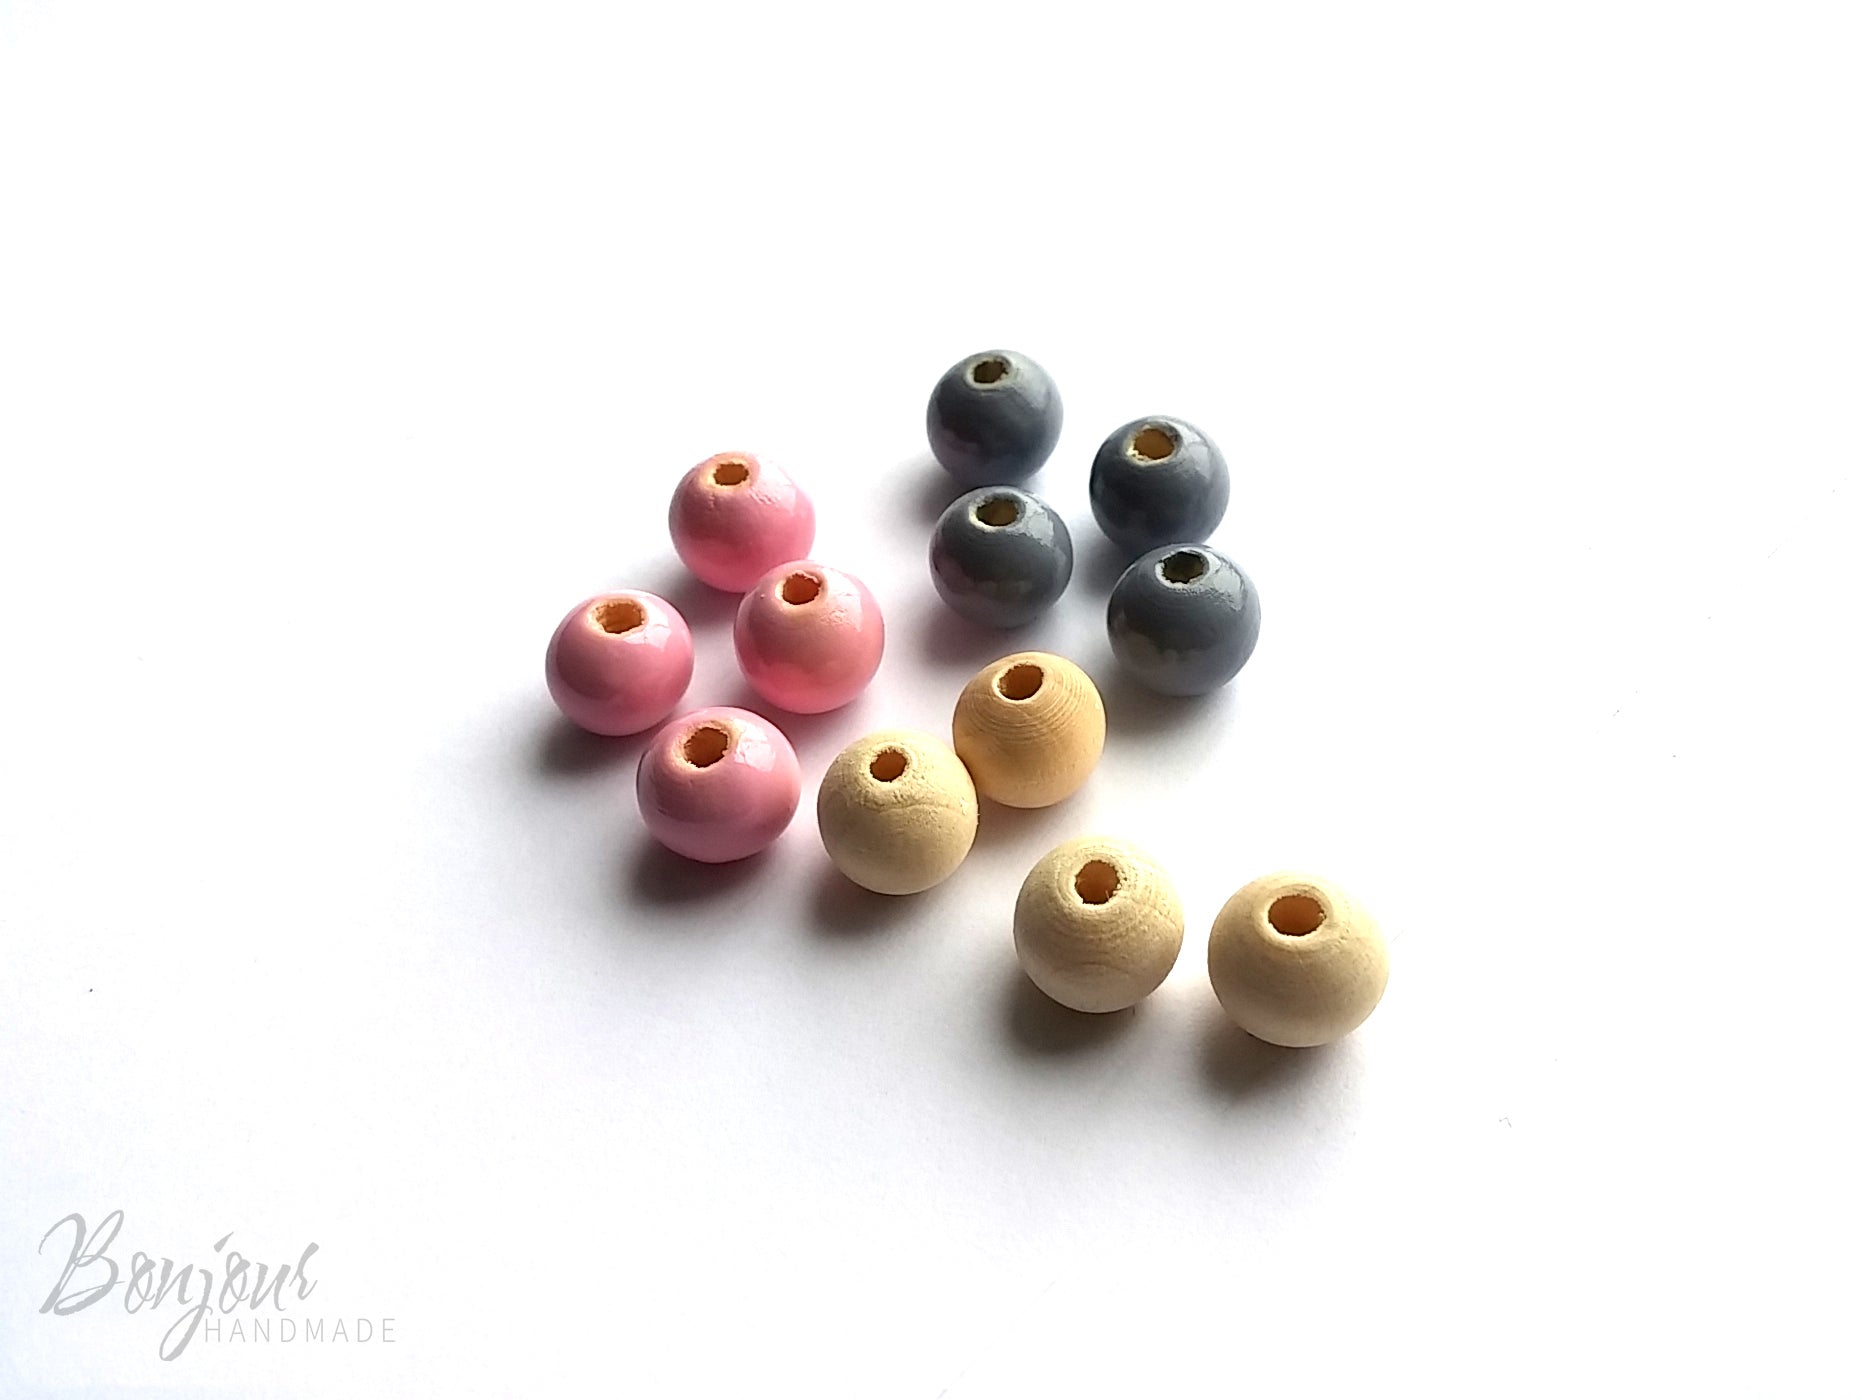 Make your own colored beads